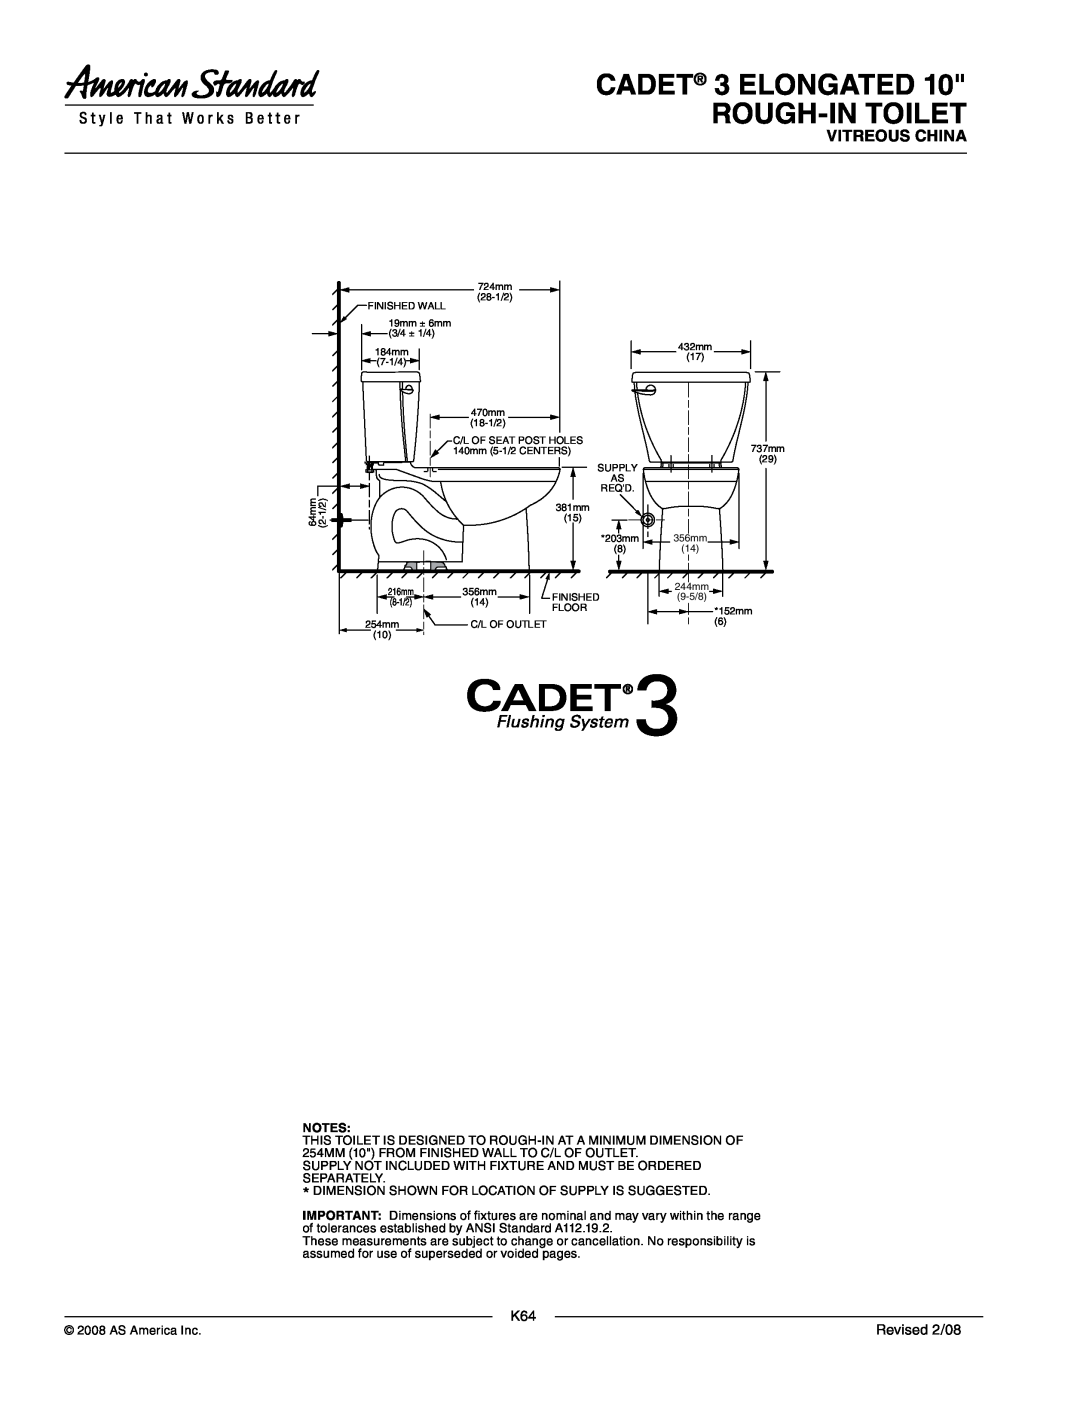 American Standard 4019.016, 2383.010 dimensions CADET 3 ELONGATED ROUGH-INTOILET, Vitreous China, Revised 2/08 